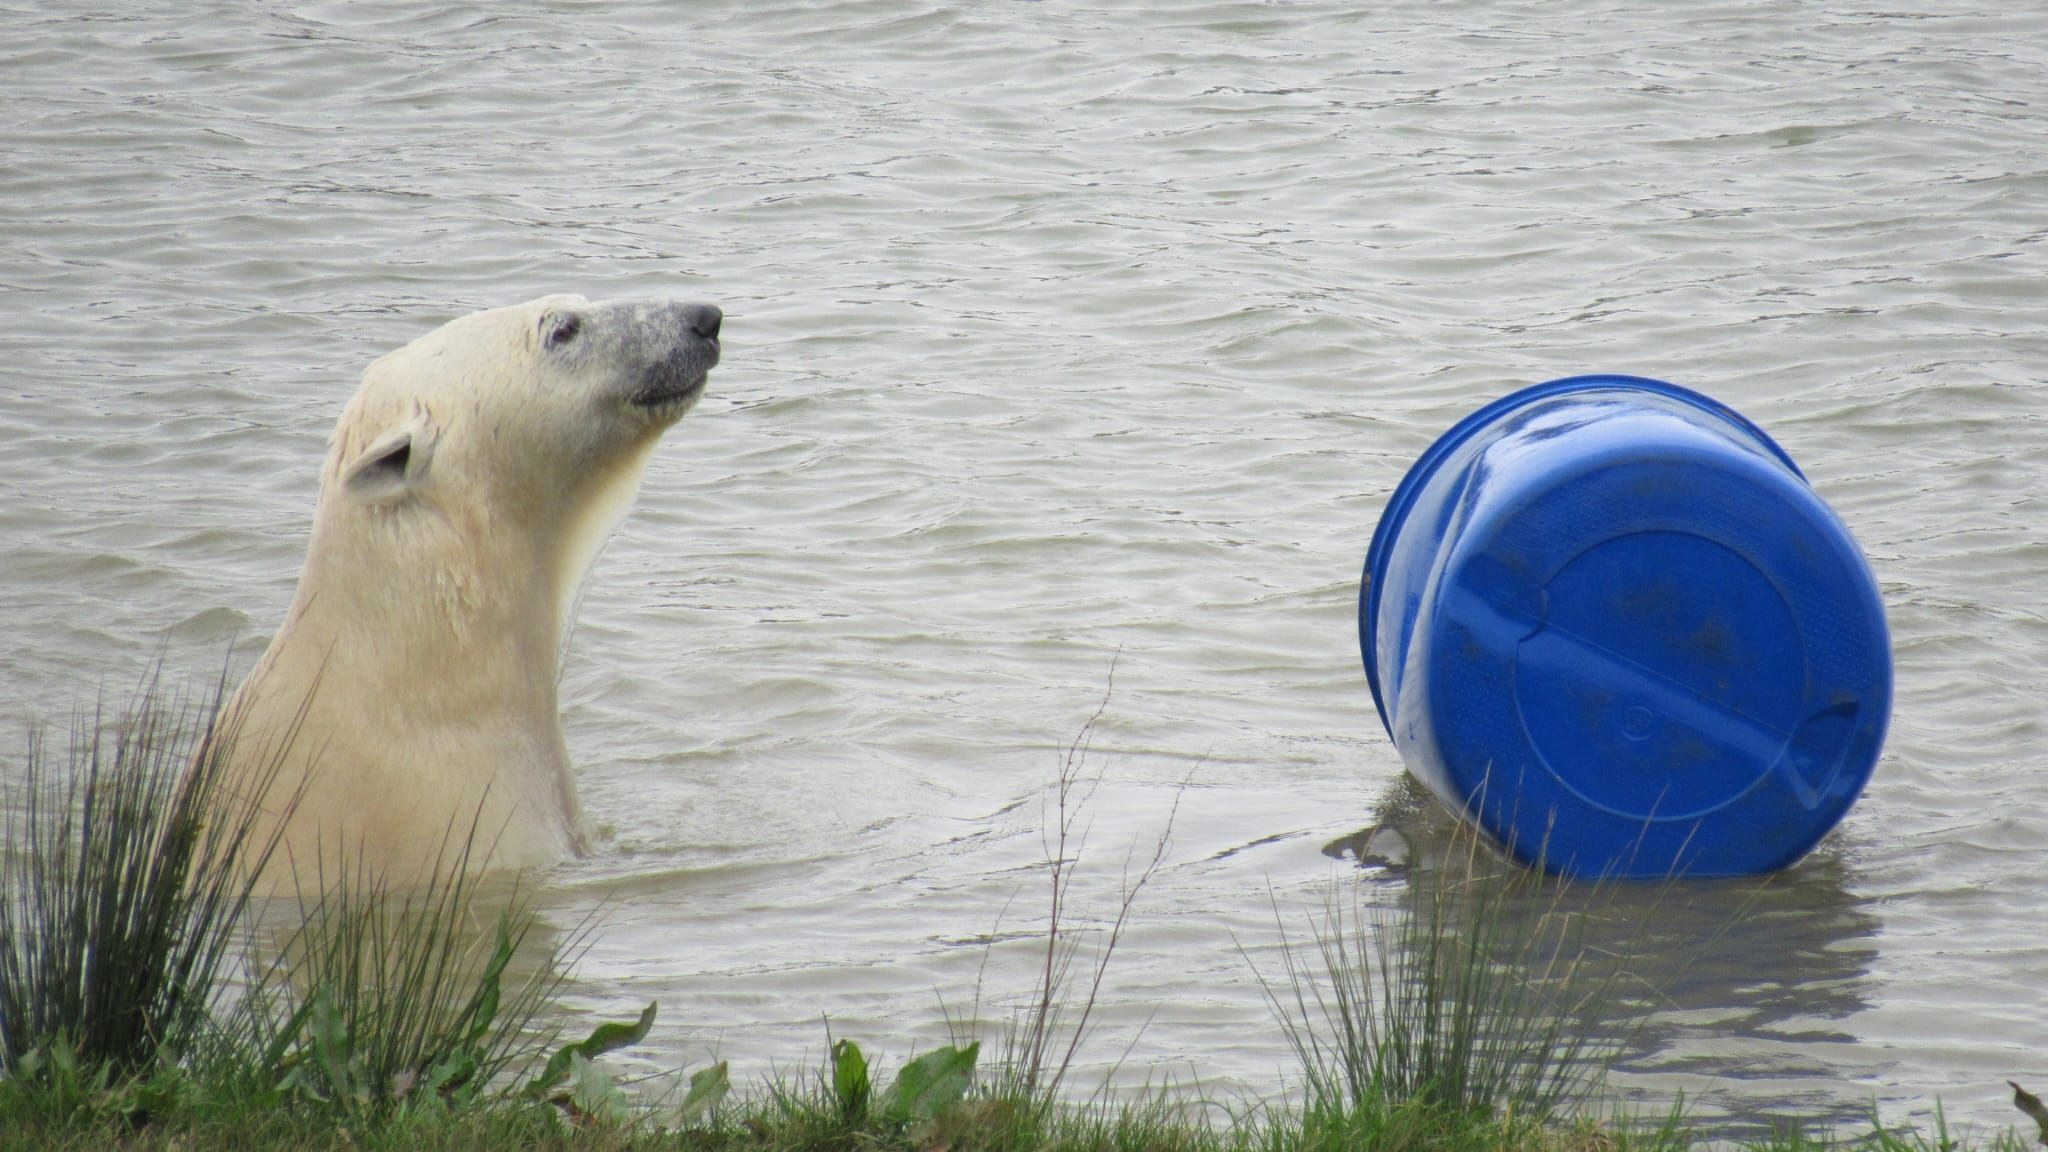 One of the polar bears in the enclosure's lake